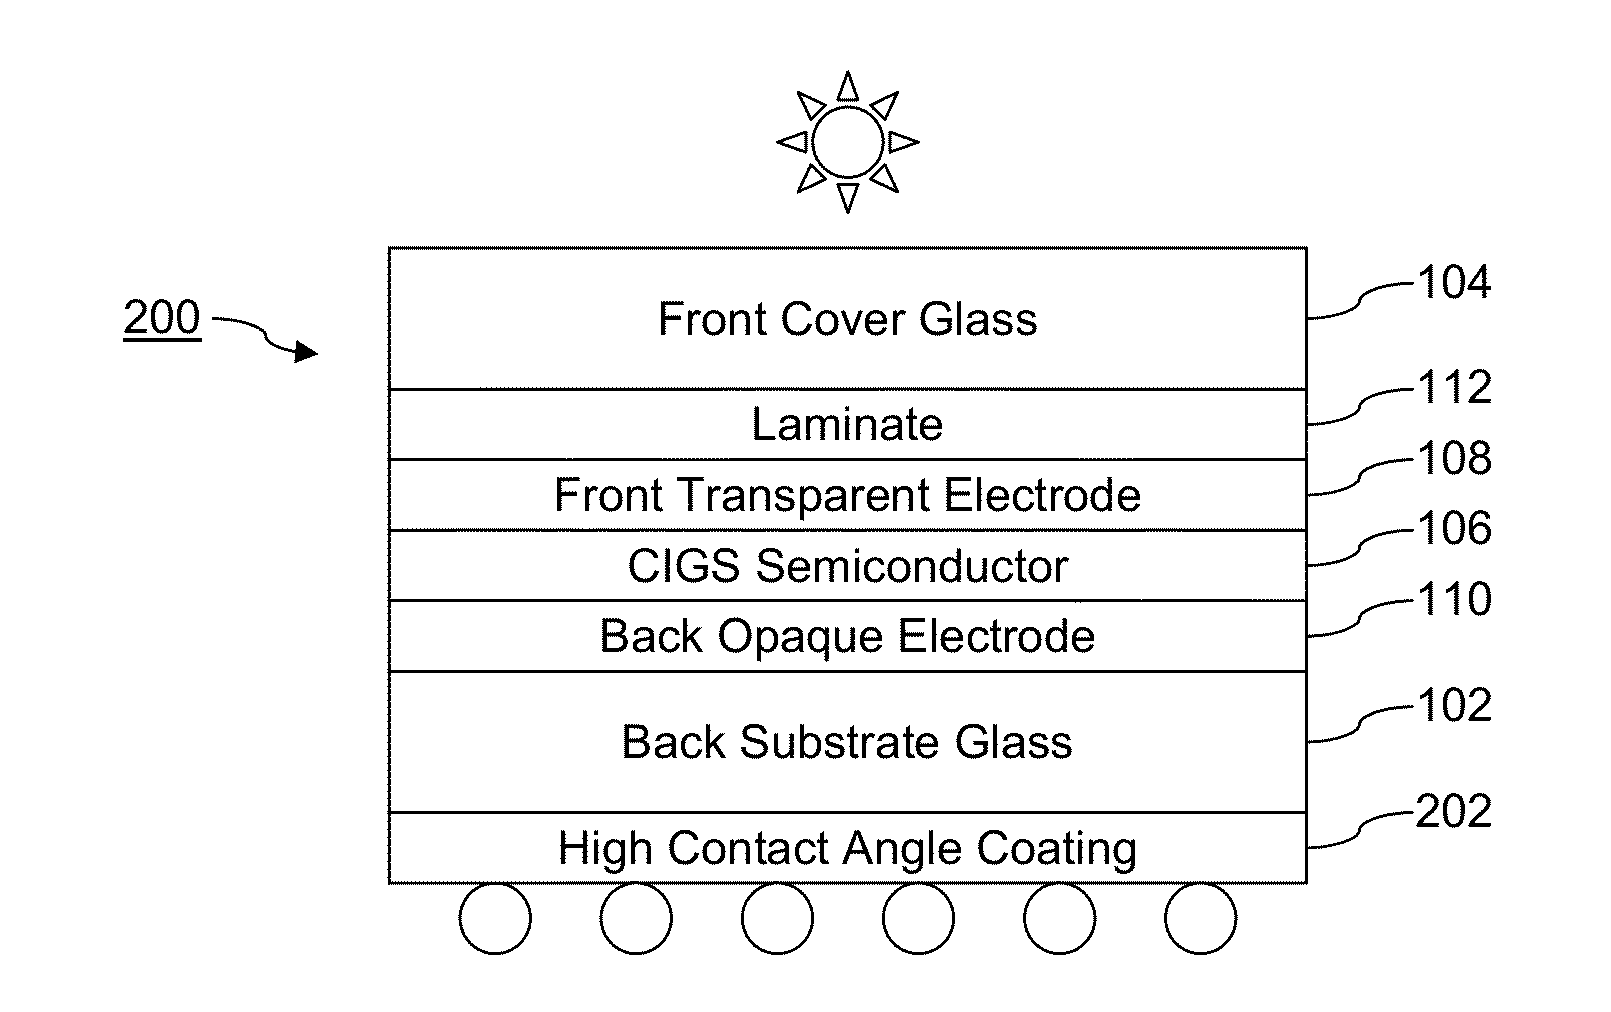 Photovoltaic module including high contact angle coating on one or more outer surfaces thereof, and/or methods of making the same